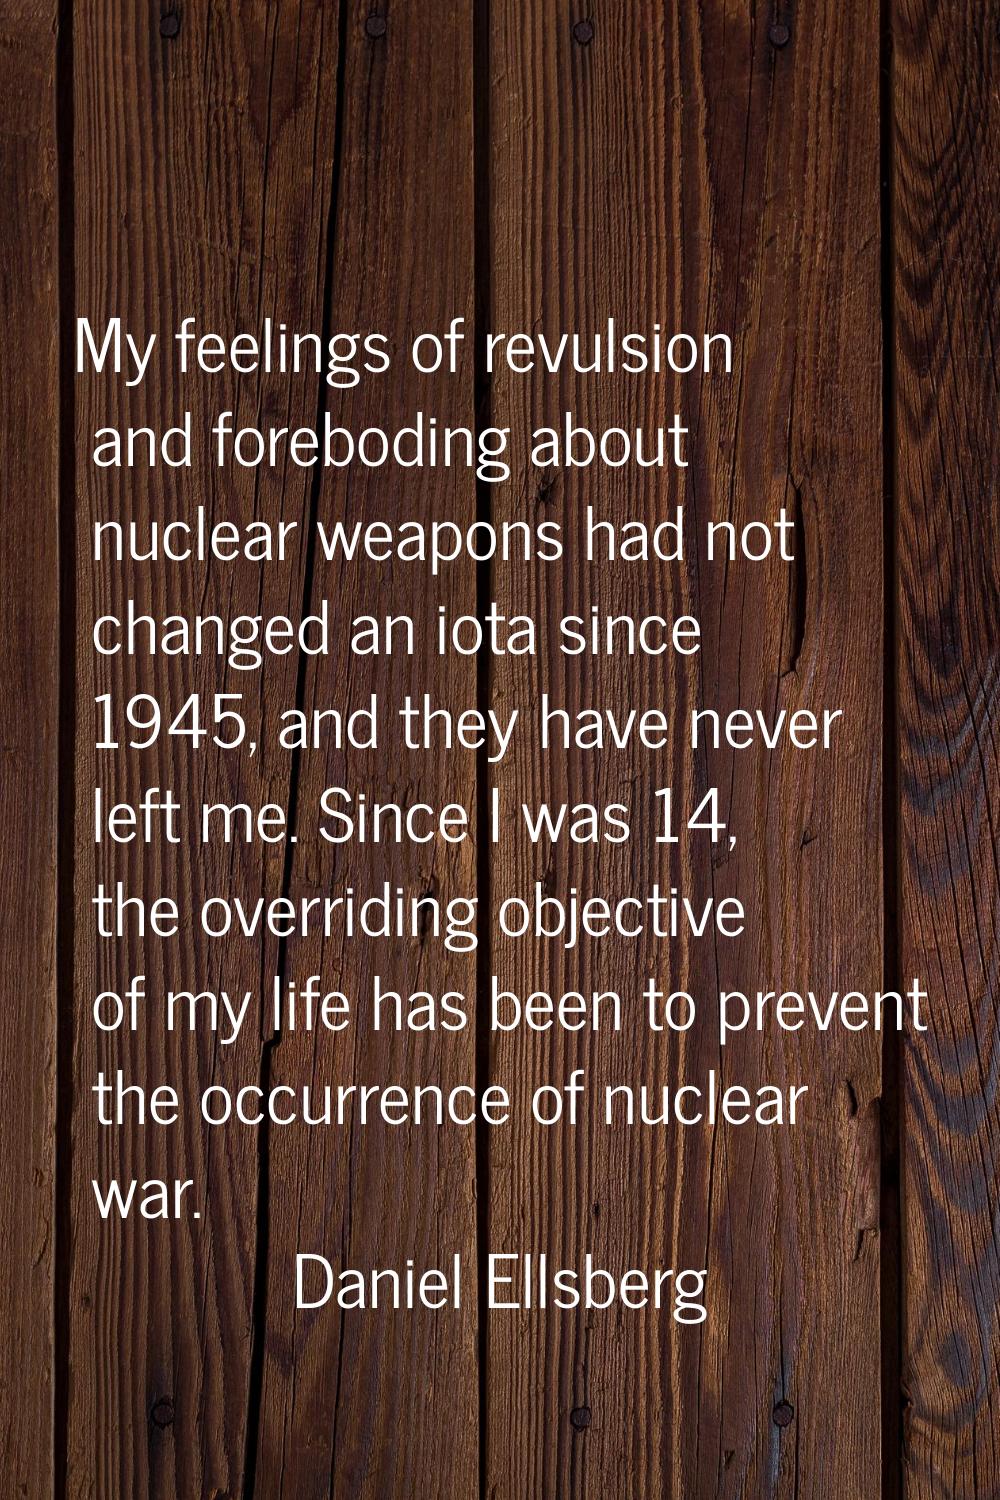 My feelings of revulsion and foreboding about nuclear weapons had not changed an iota since 1945, a